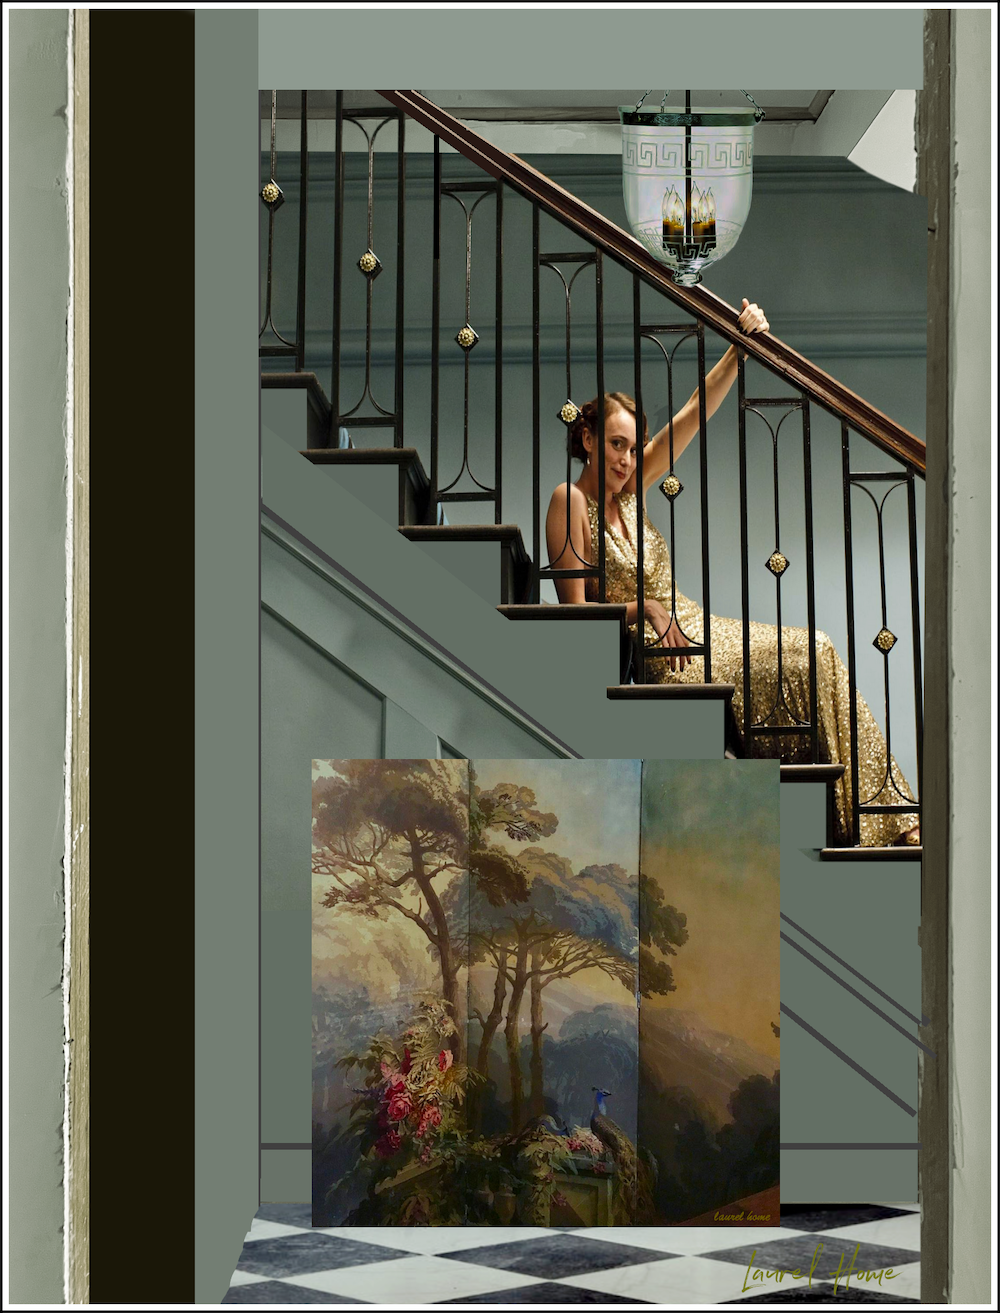 new stair railing design inspired by upstairs-downstairs (2010)